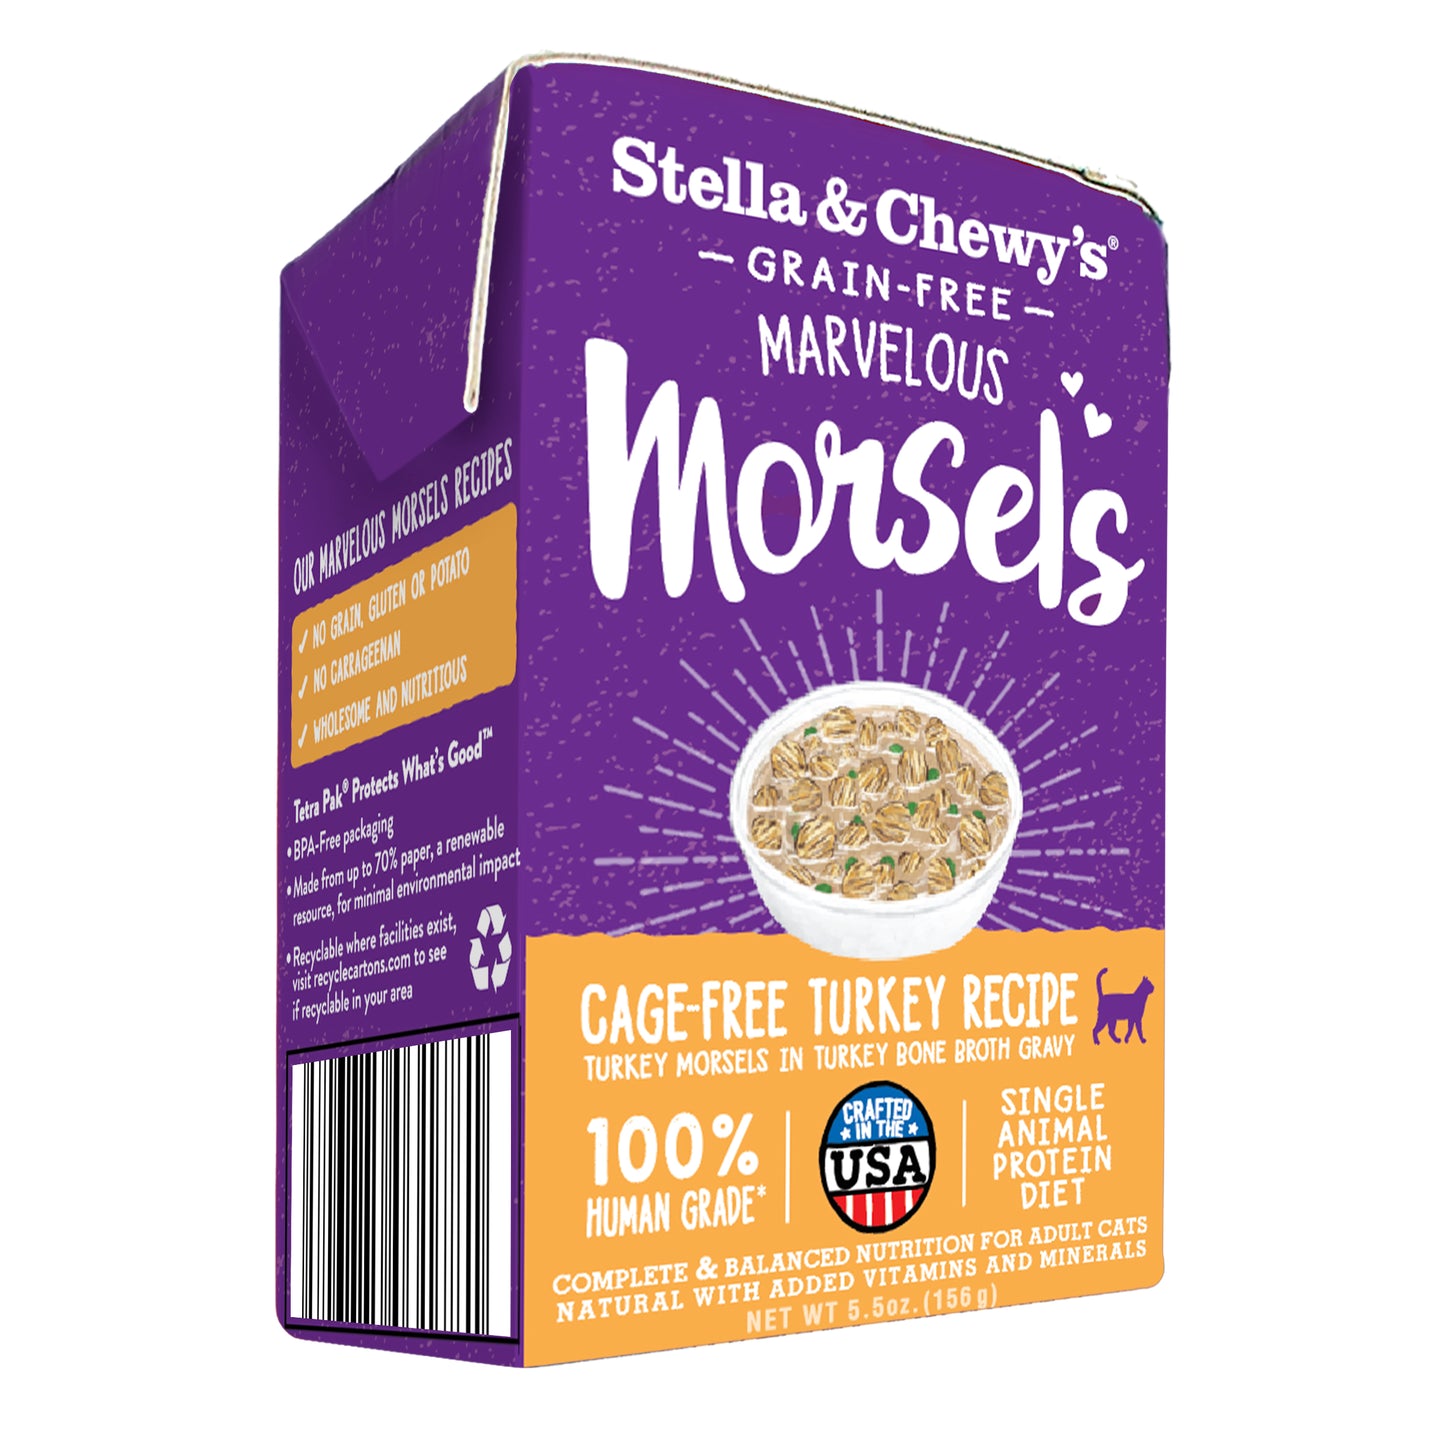 Stella & Chewy’s Marvelous Morsels Cage-Free Turkey Wet Cat Food 5.5oz